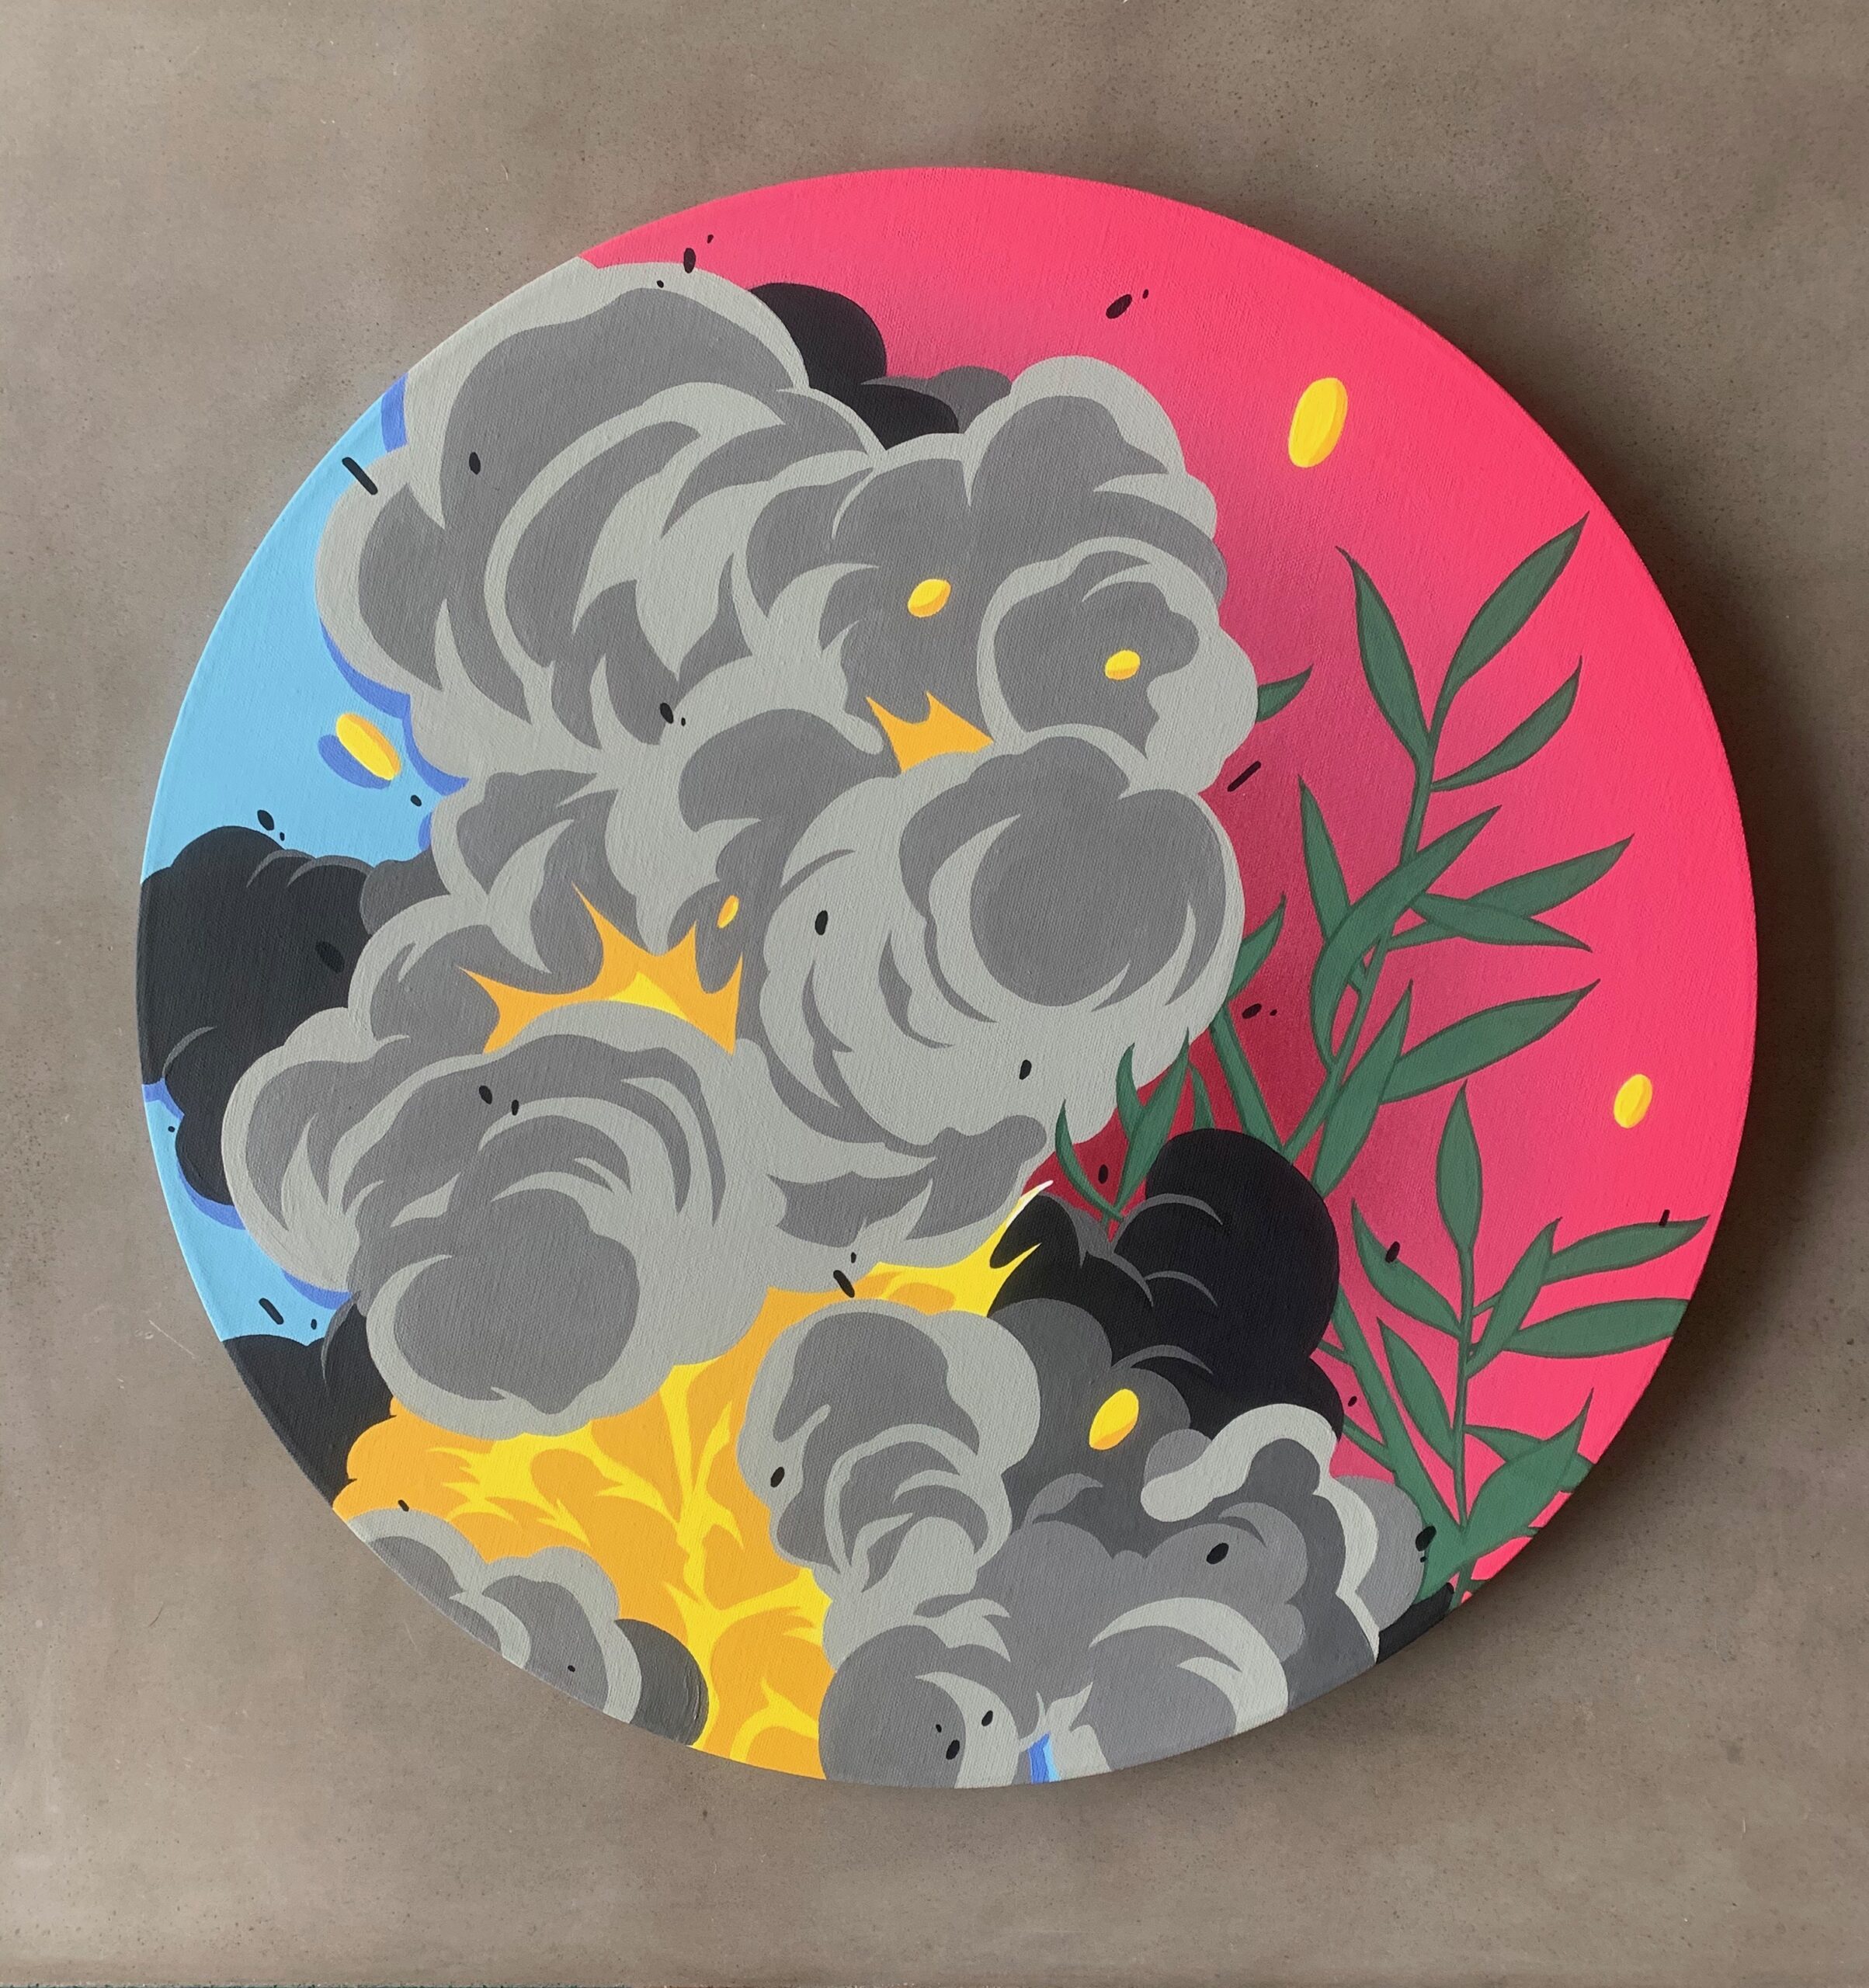 "Breeze", 24" Round Canvas by Nover. All Acrylic Paint, 2020.